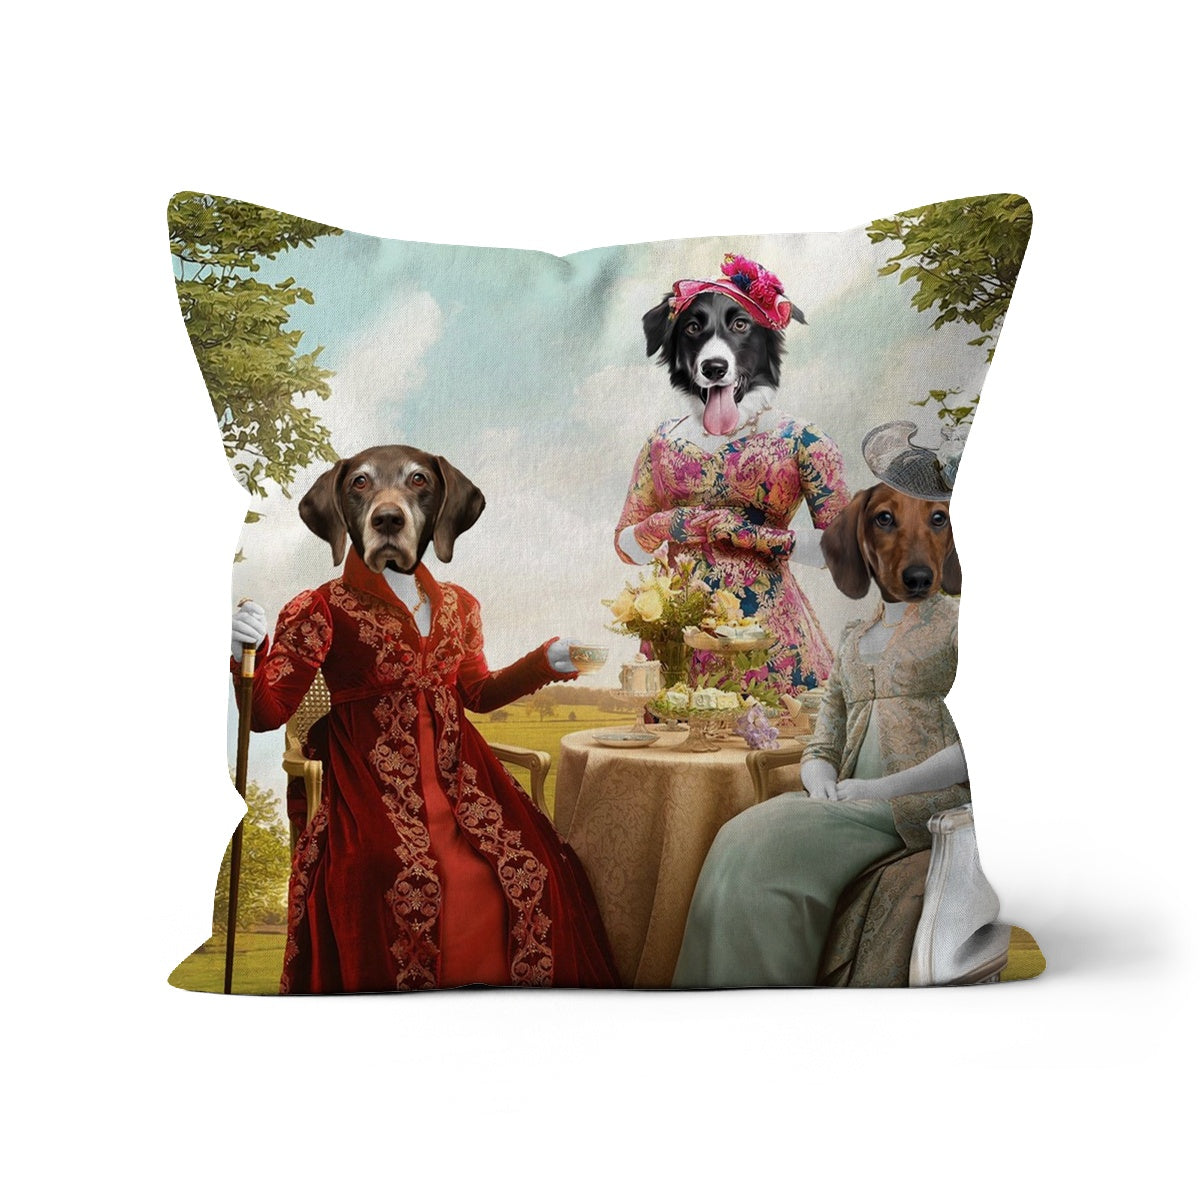 Paw & Glory, paw and glory, dog personalized pillow, pillows with dogs picture, throw pillow personalized, my pet pillow, pet picture on pillow, pillow of your dog, Pet Portrait cushion,